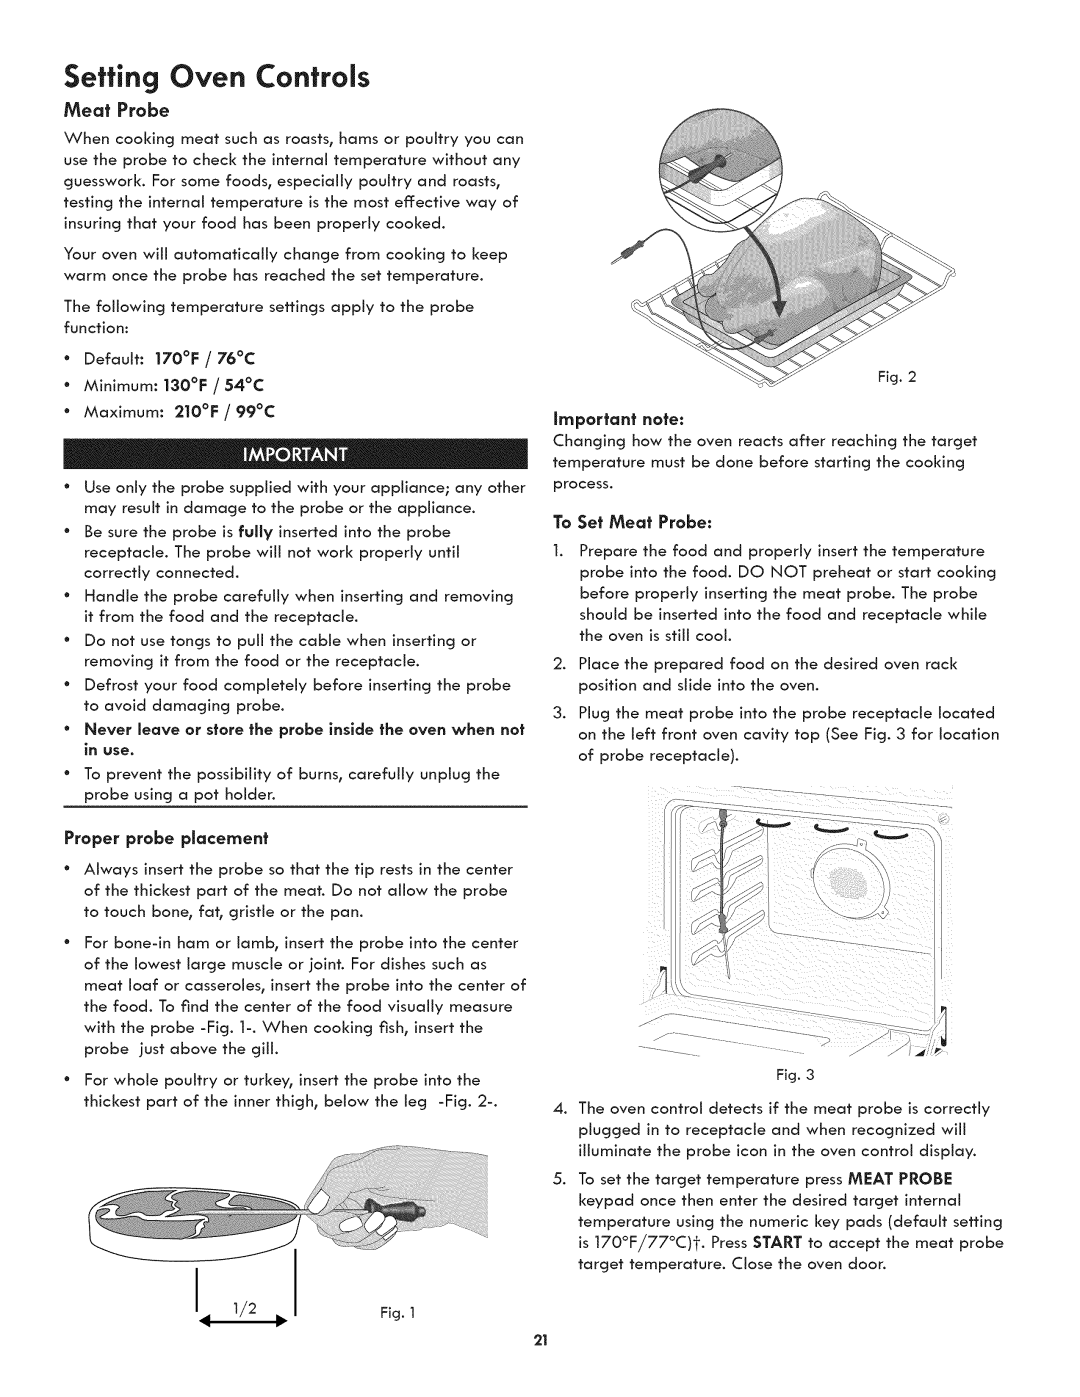 Kenmore 790.3105 manual Setting Oven Controls, To Set Meat Probe, Proper probe placement 